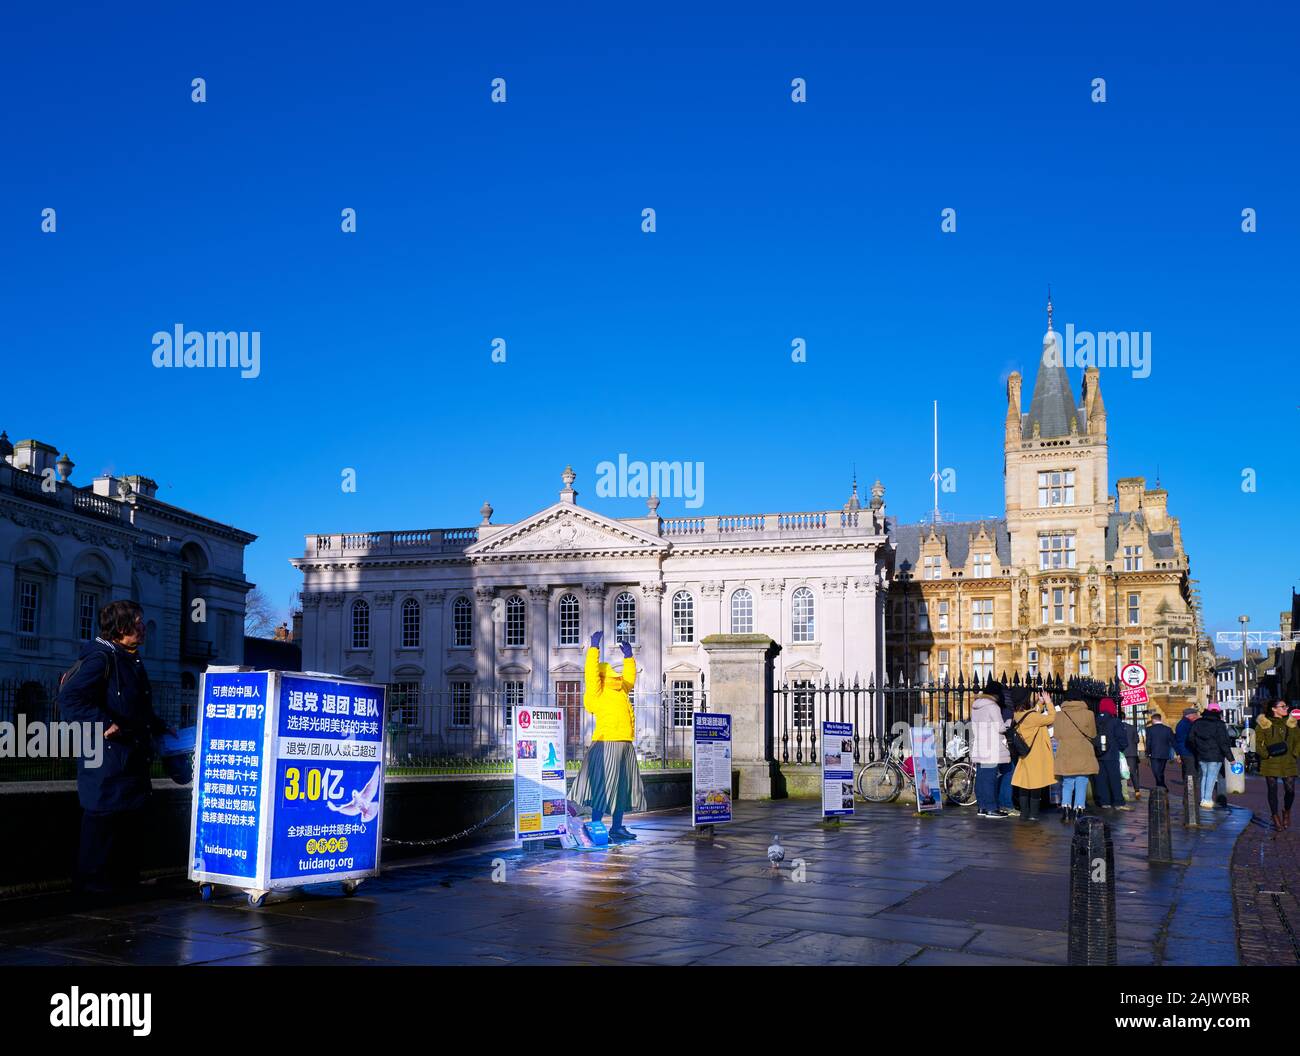 A Falun Dafa (Falun Gong) member makes a highly visible protest outside Senate House, university of Cambridge,against the chinese communist government. Stock Photo